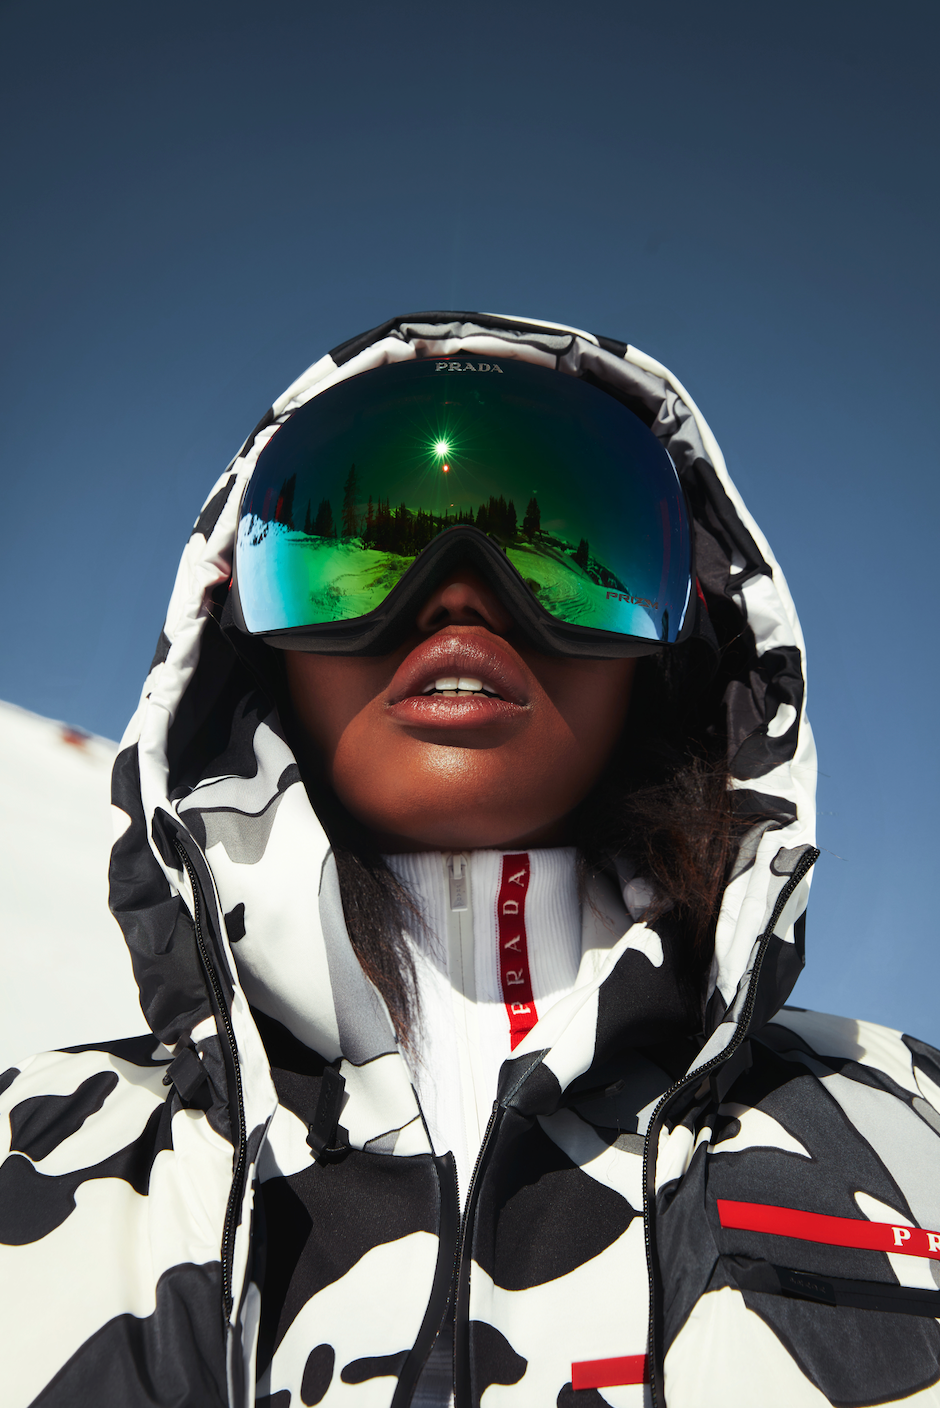 11 Ski Capsule Collections To Wear On The Slopes Or In Your Chalet